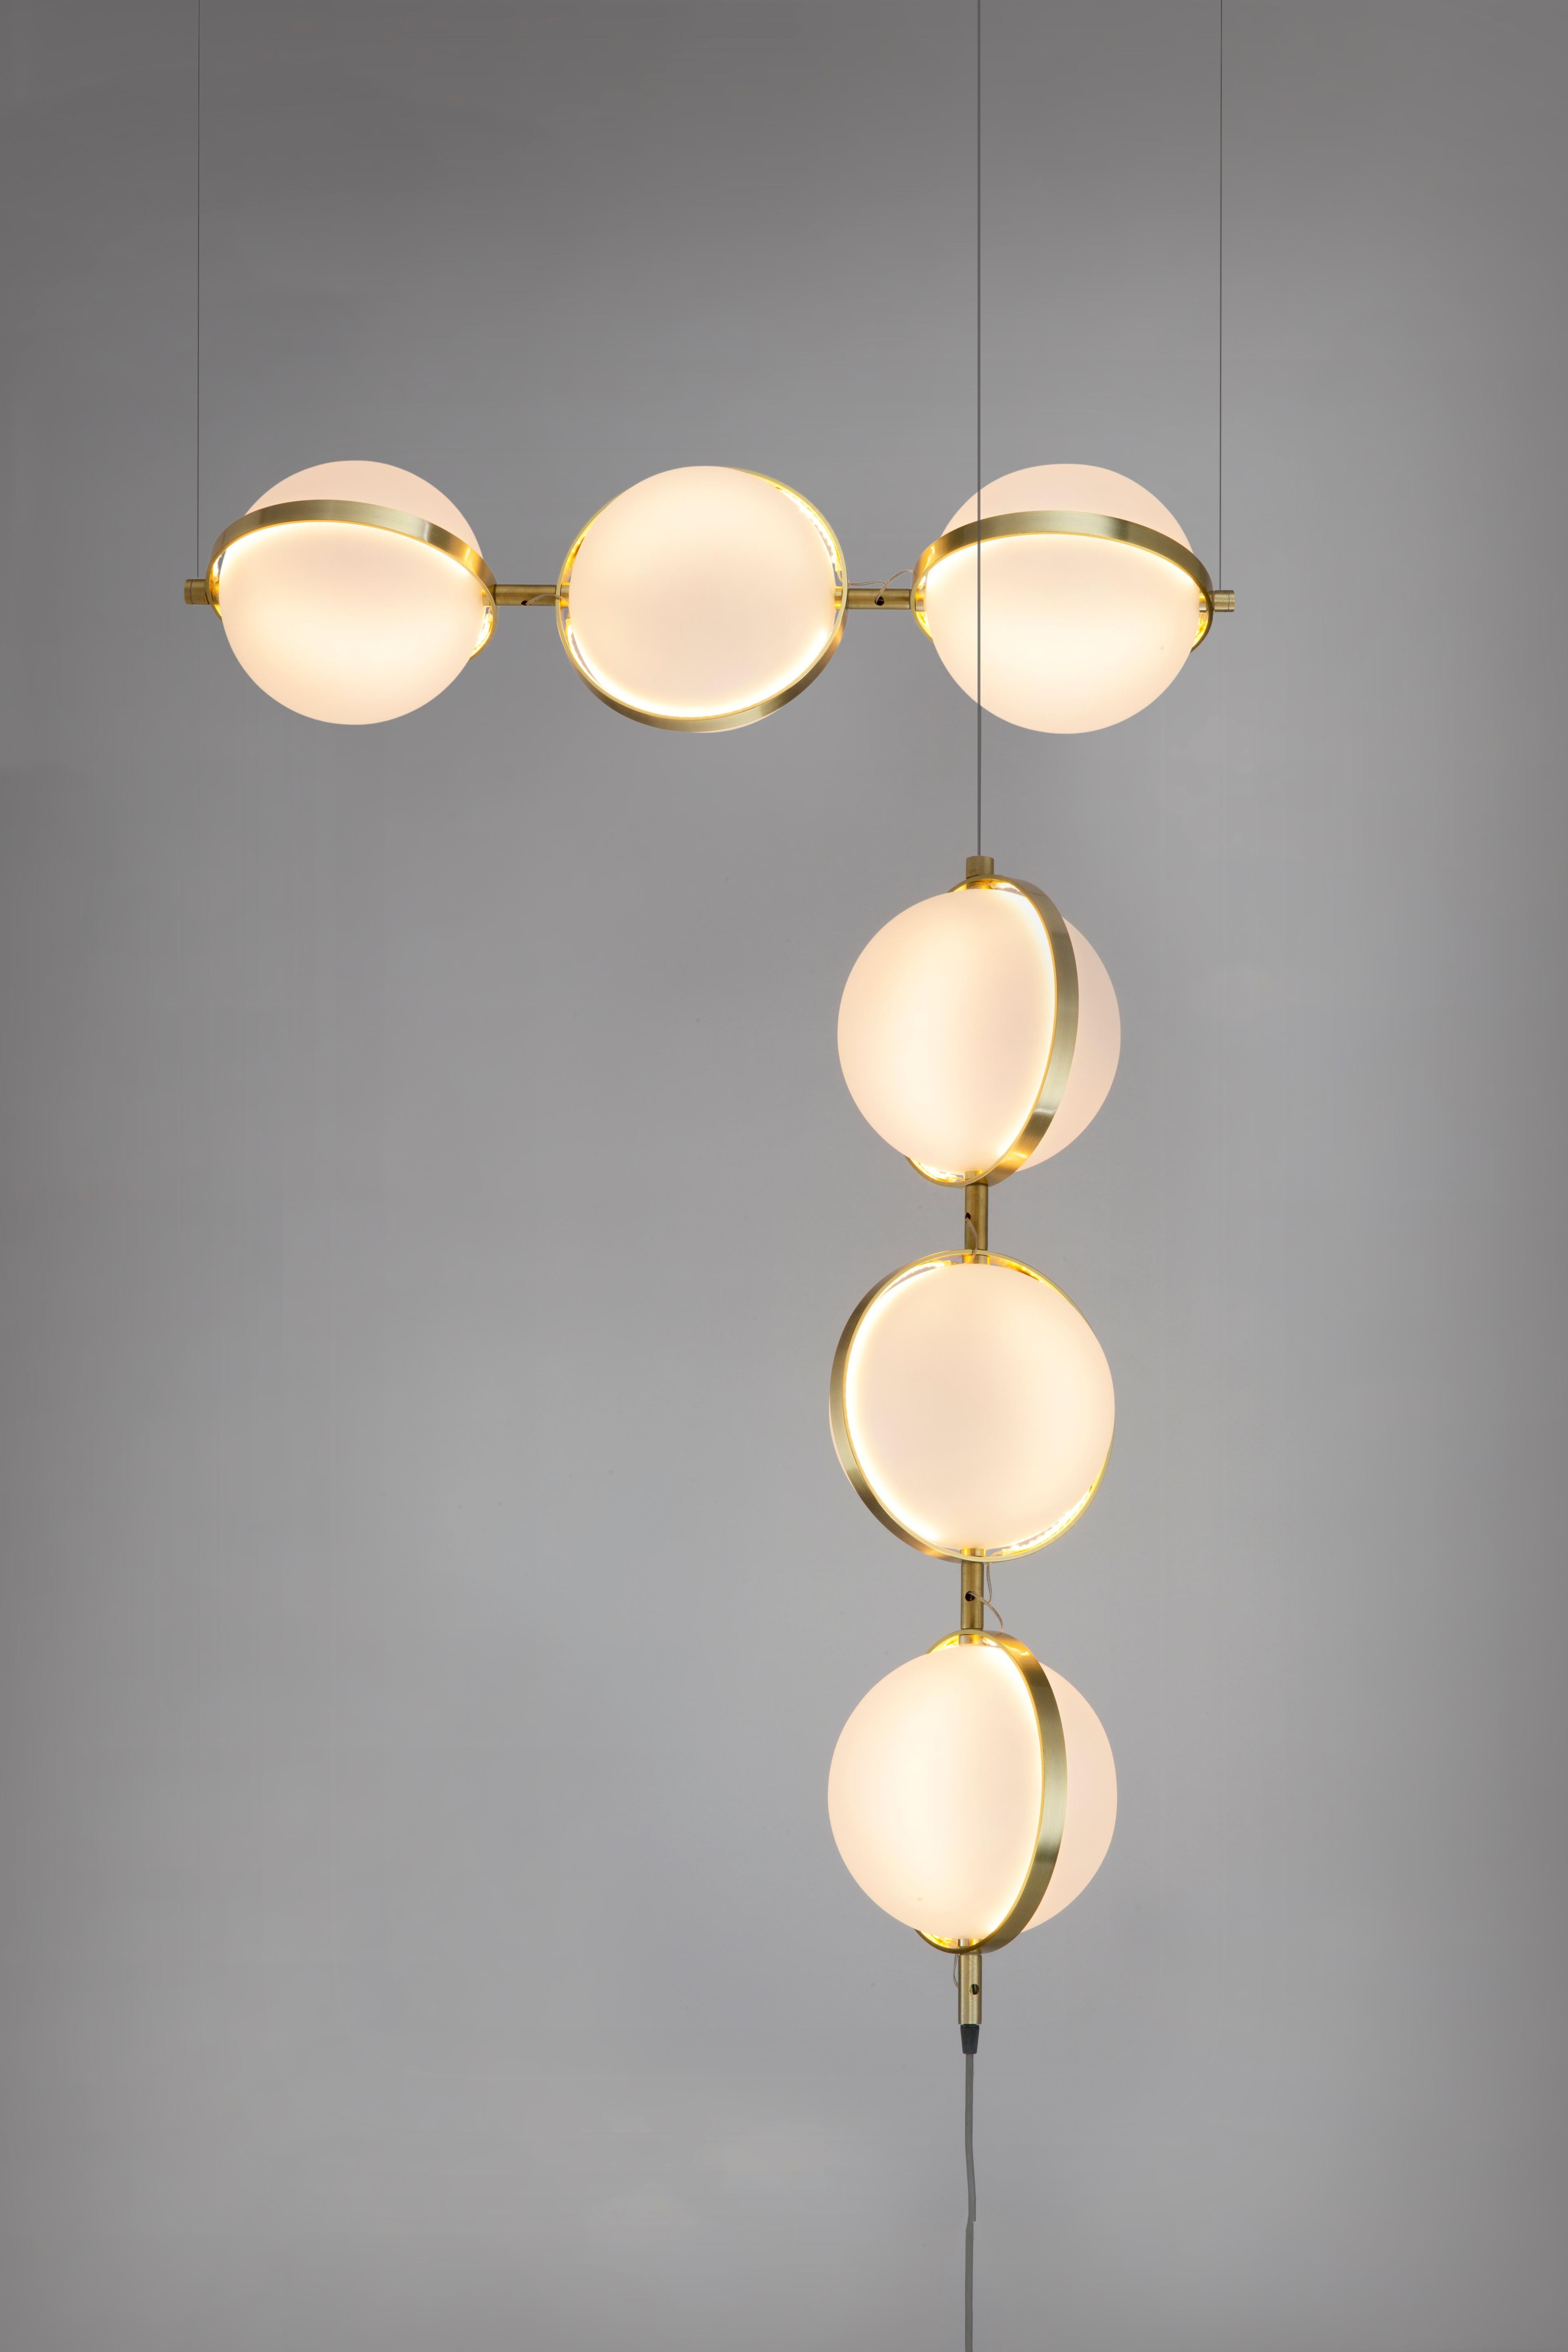 The Orion TX Pendant is one of the latest families in the evolution of the Flexus series by Baroncelli. 

Flexus is a lighting system that comprises a palette of abstracted lines, curves and circles. Echoing the language of modernist modular